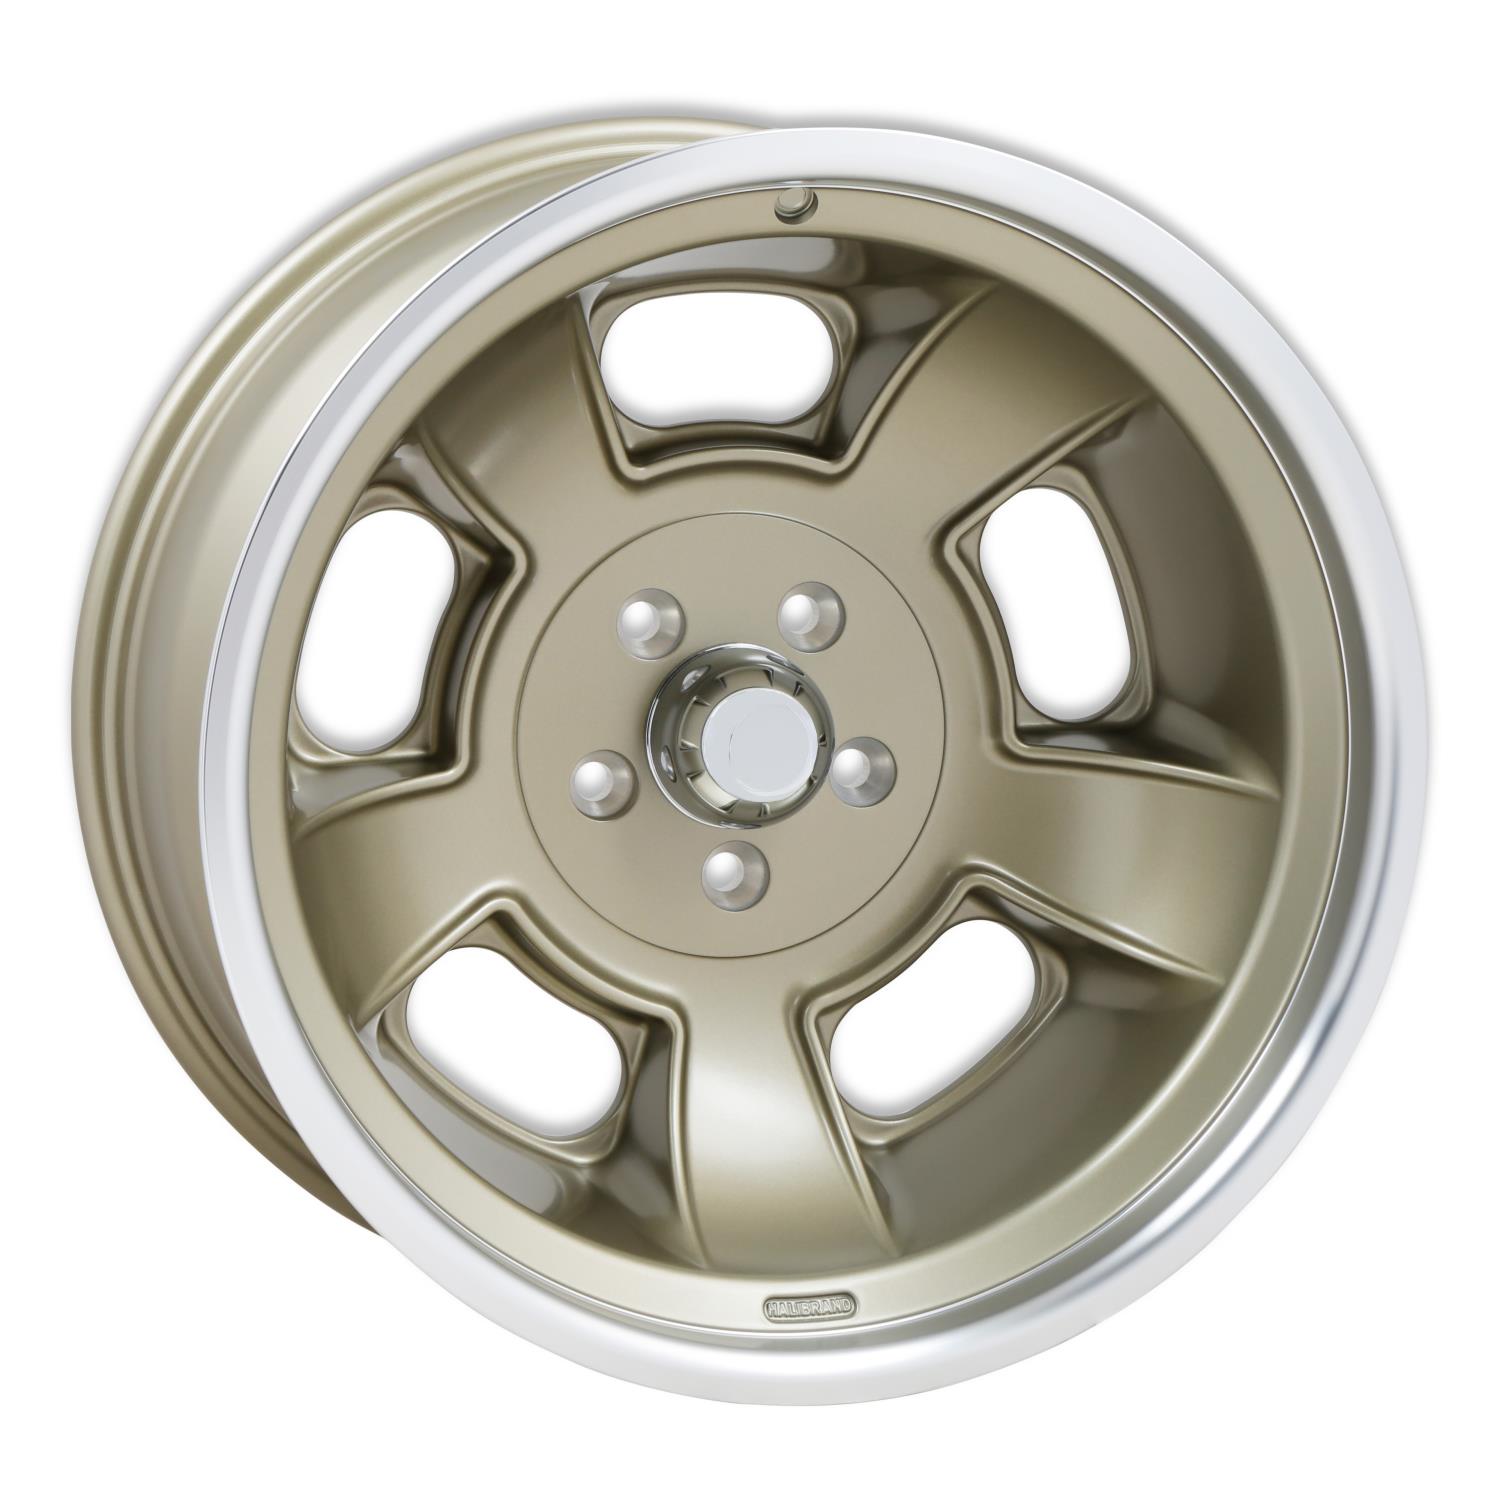 Sprint Rear Wheel, Size: 20x10", Bolt Pattern: 5x5", Backspace: 4" [MAG7 with Machined Lip - Semi Gloss Clearcoat]